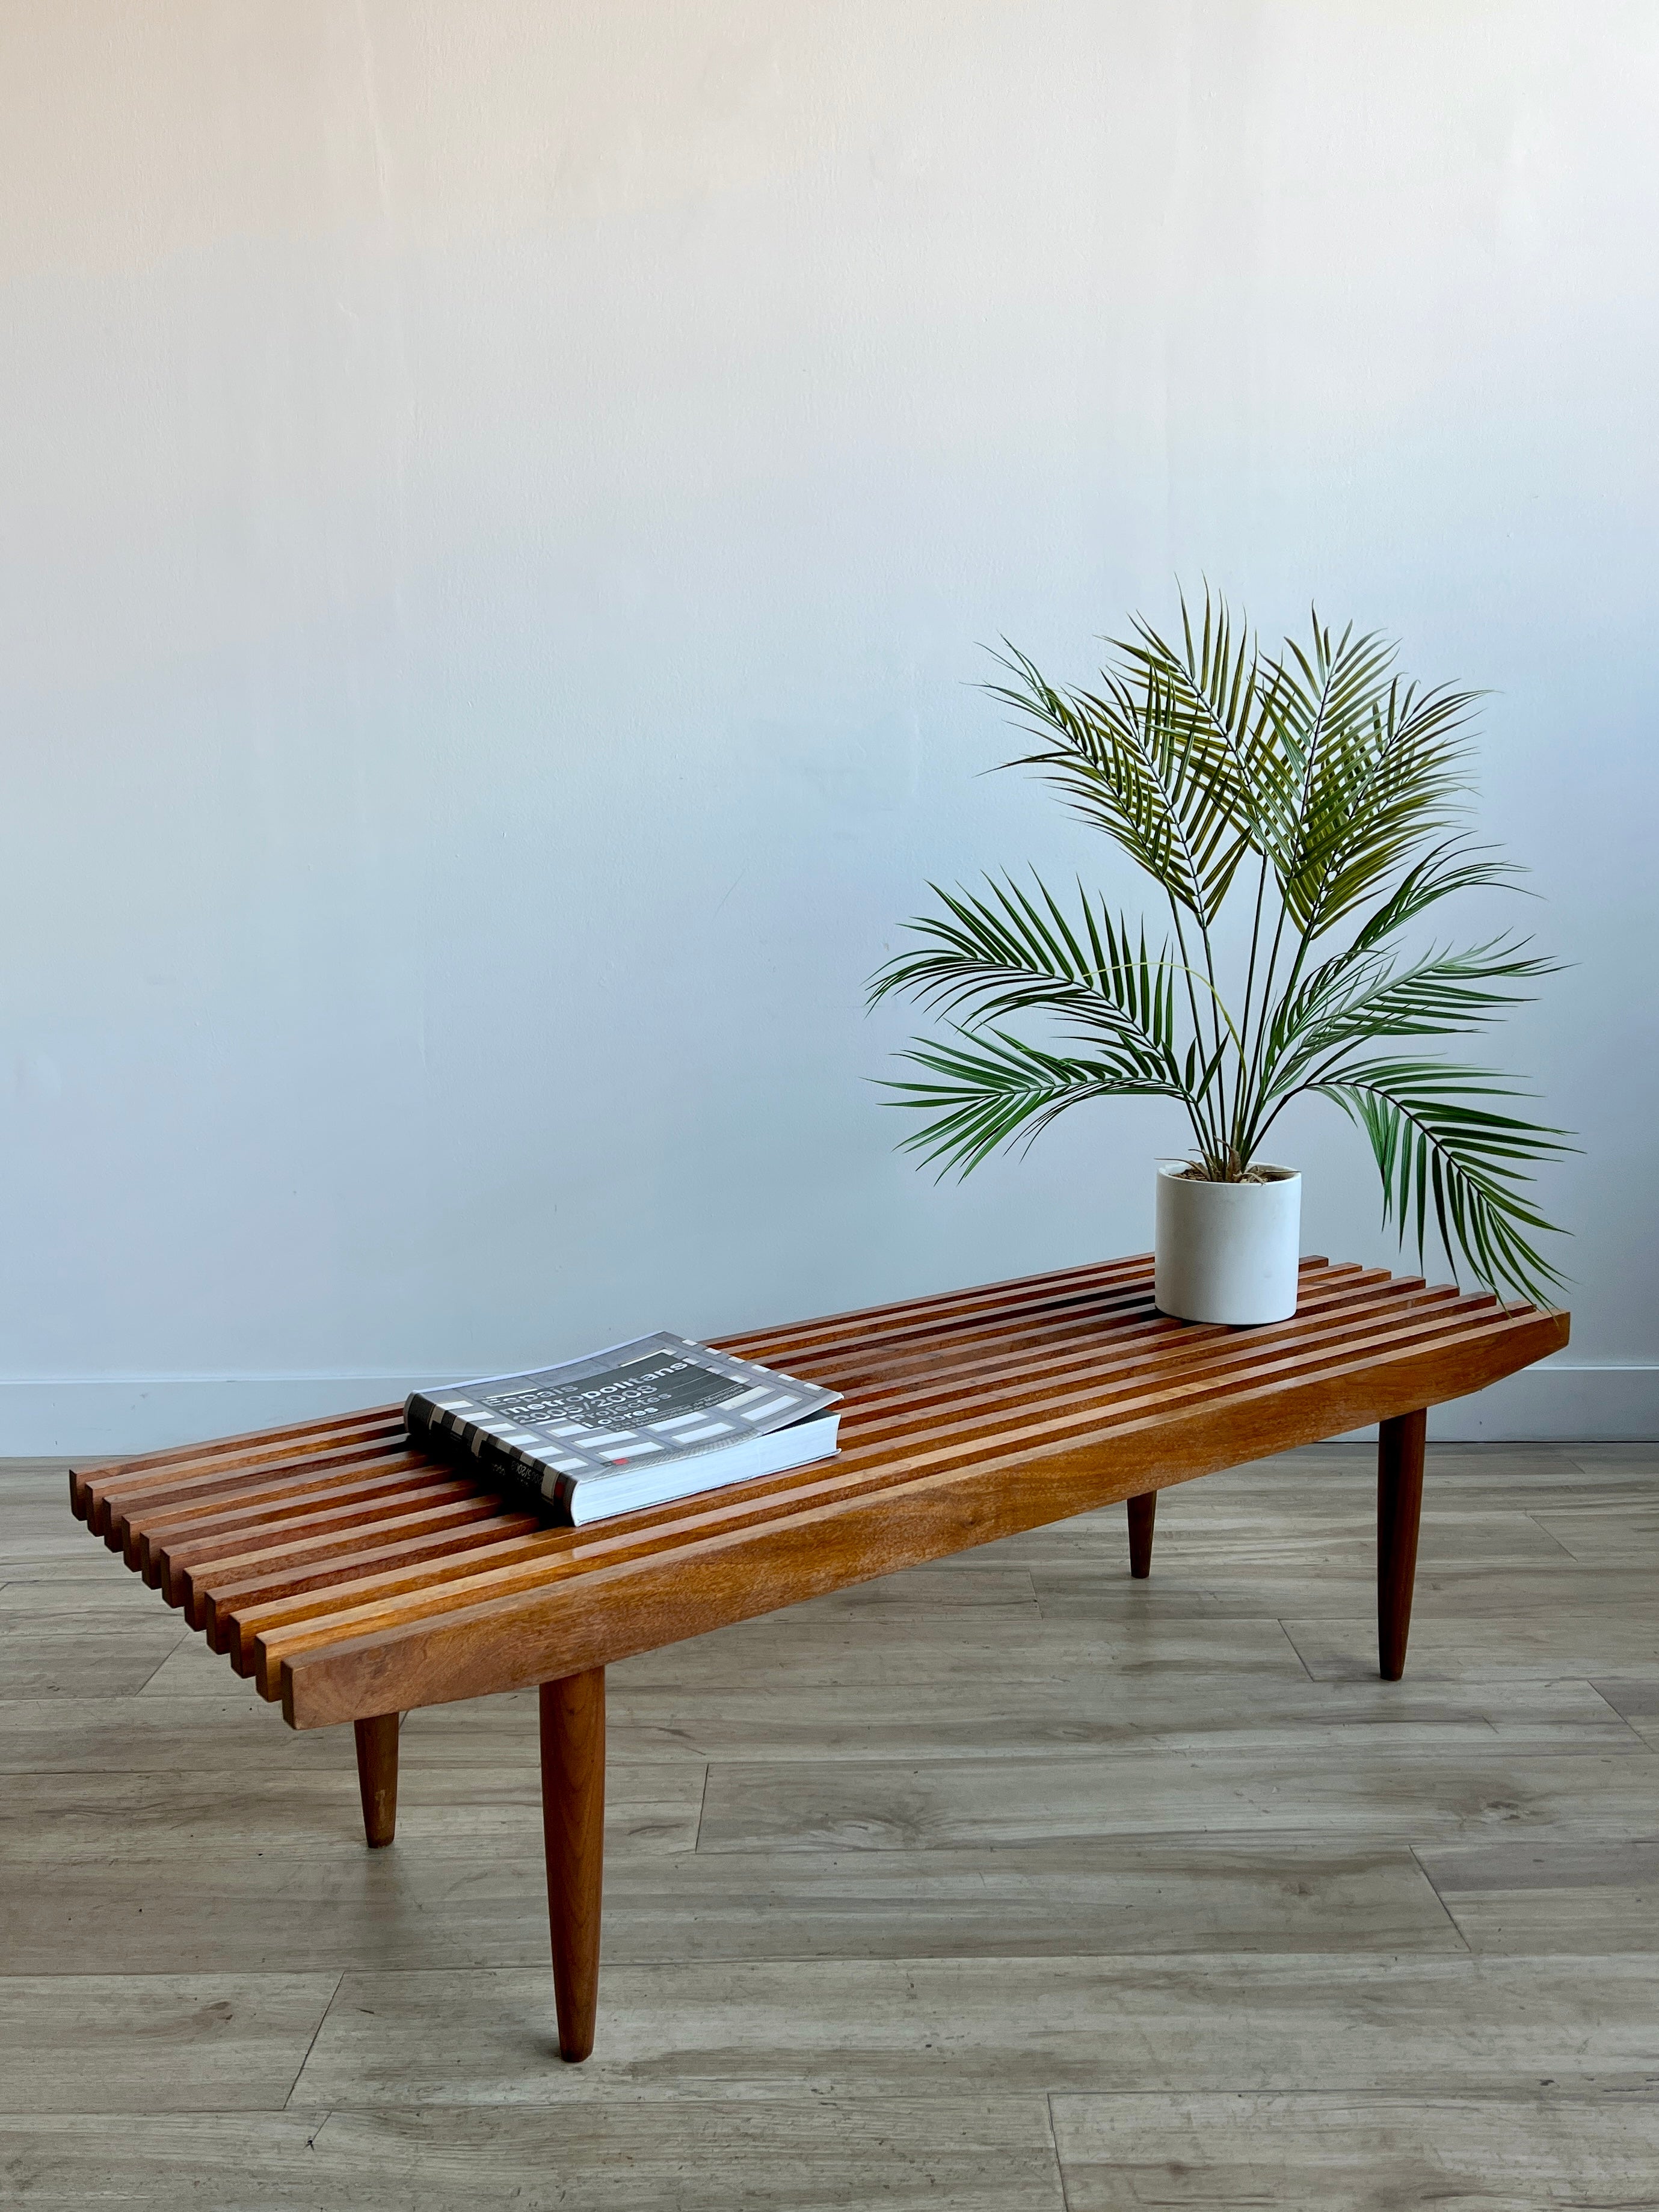 Vintage Mid Century Bench / Coffee Table